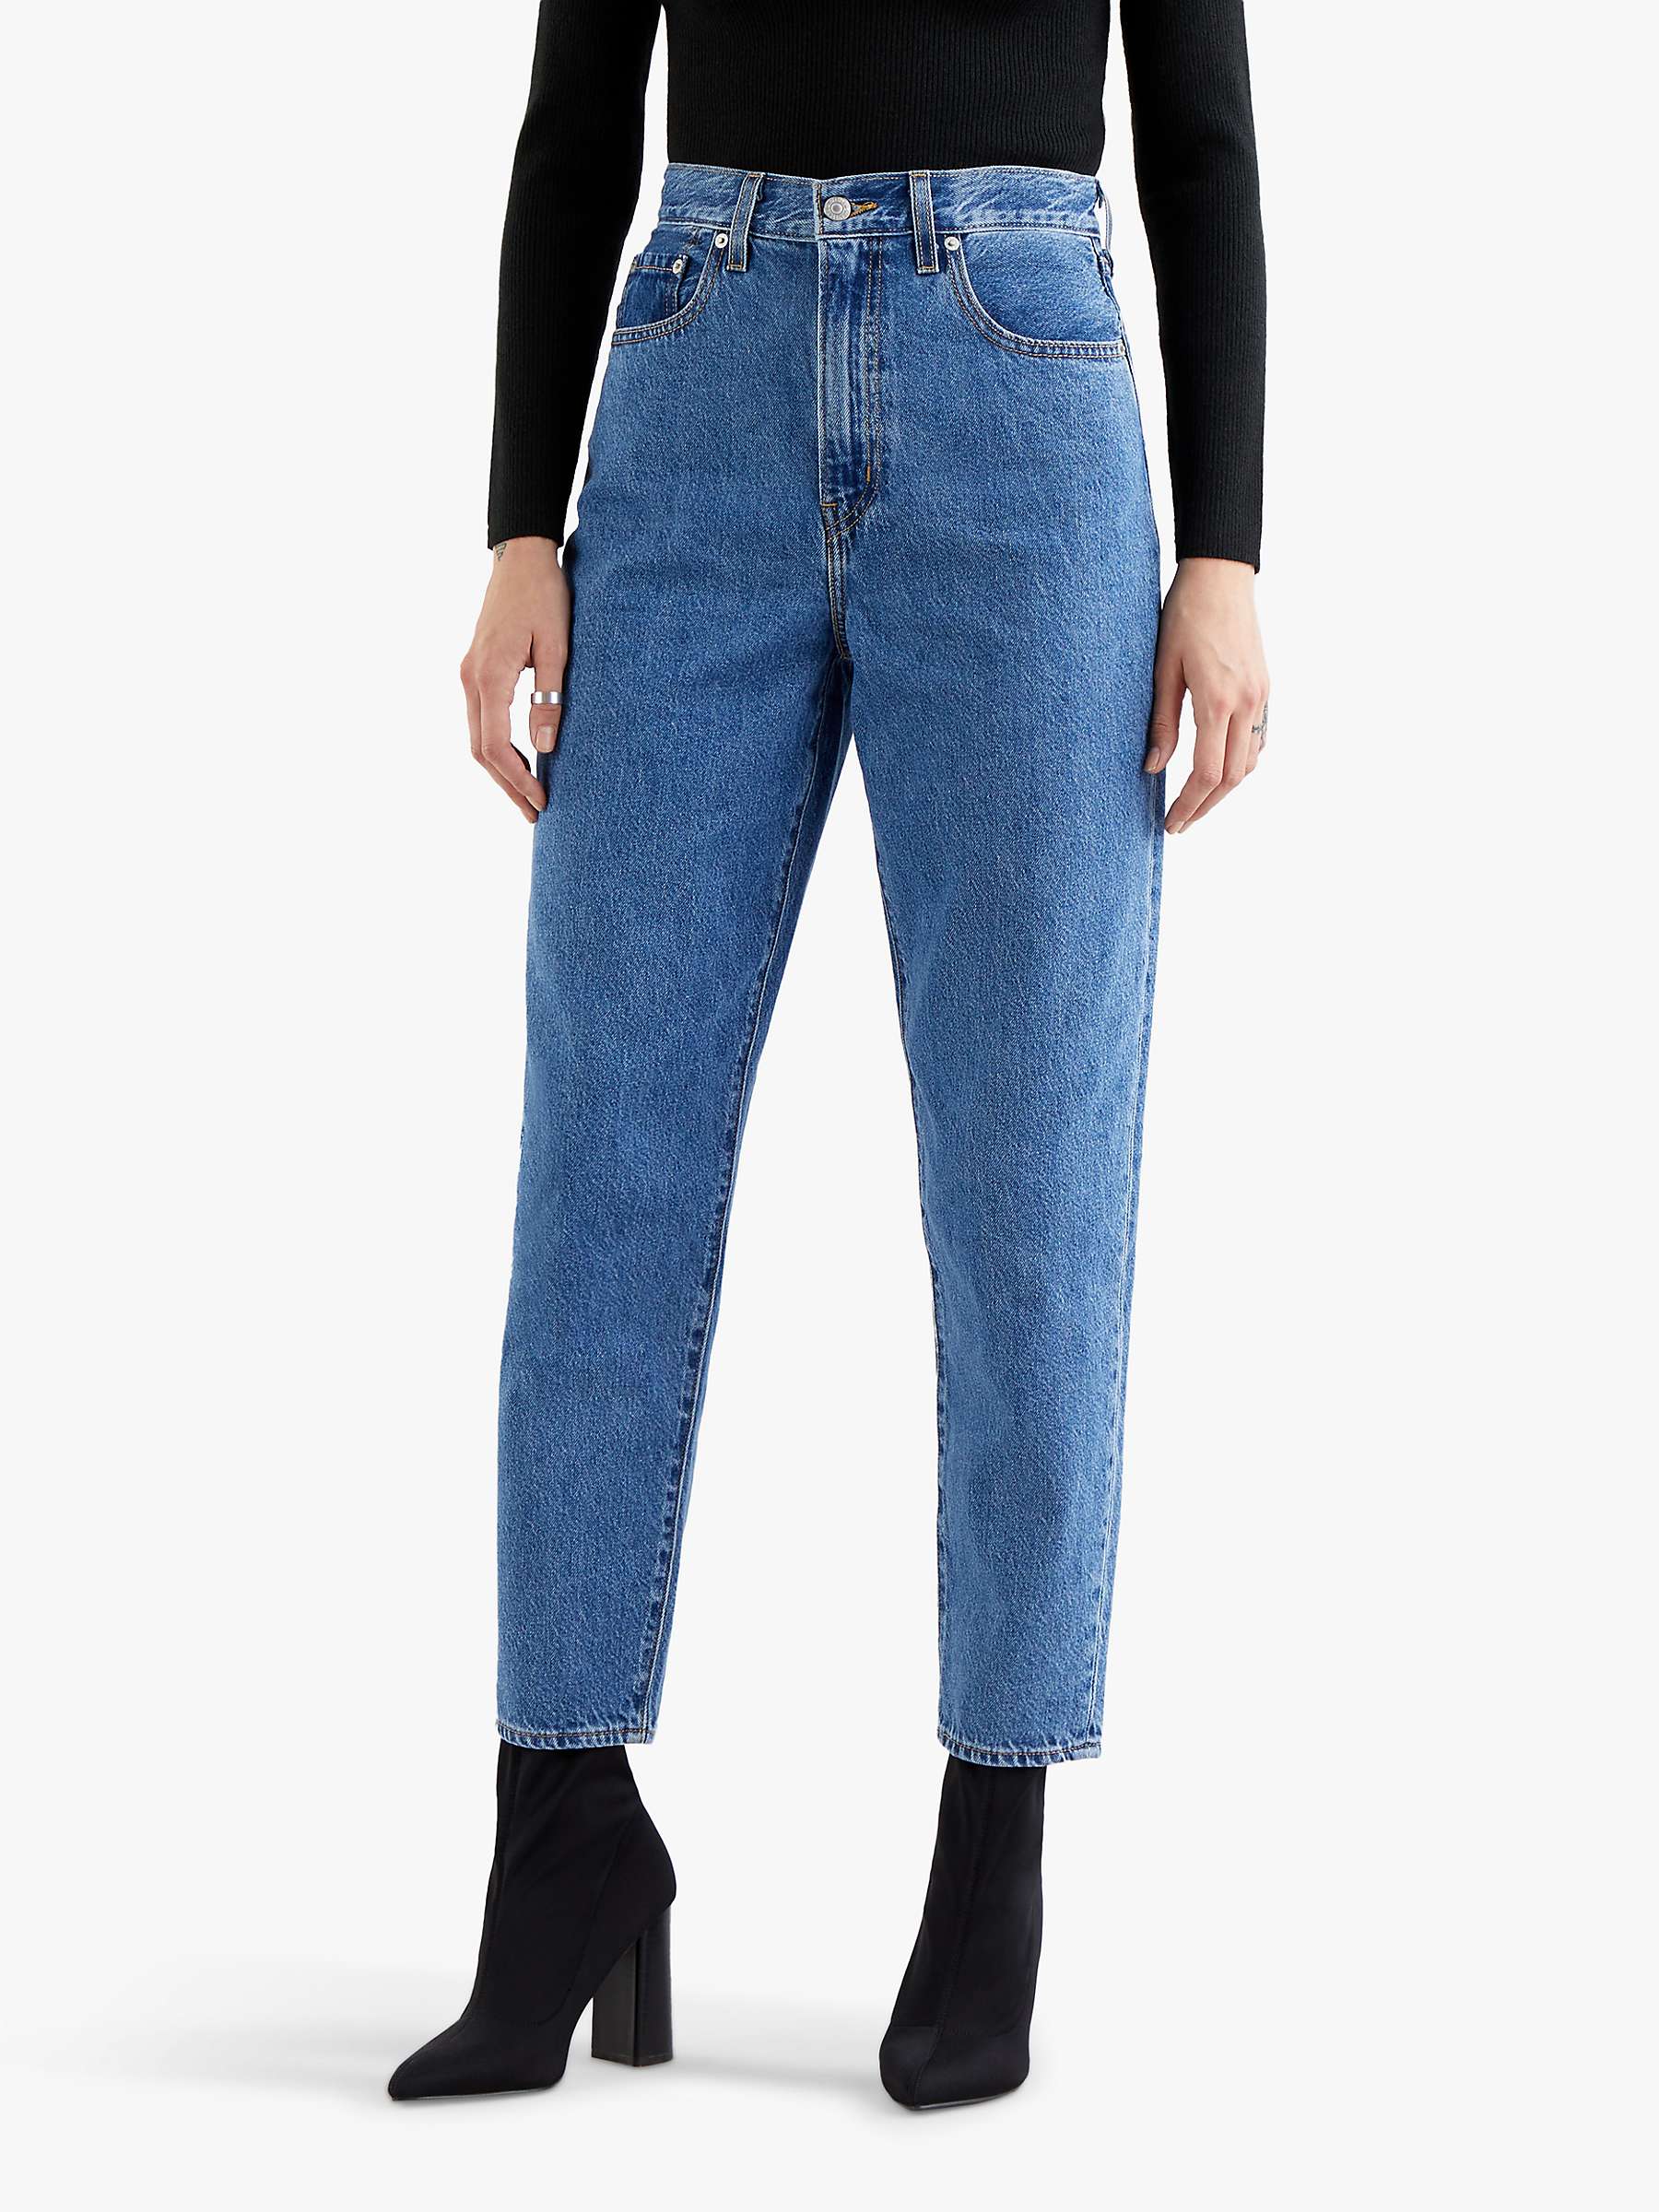 Levi's High Waisted Loose Taper Fit Jeans, Hold My Purse at John Lewis